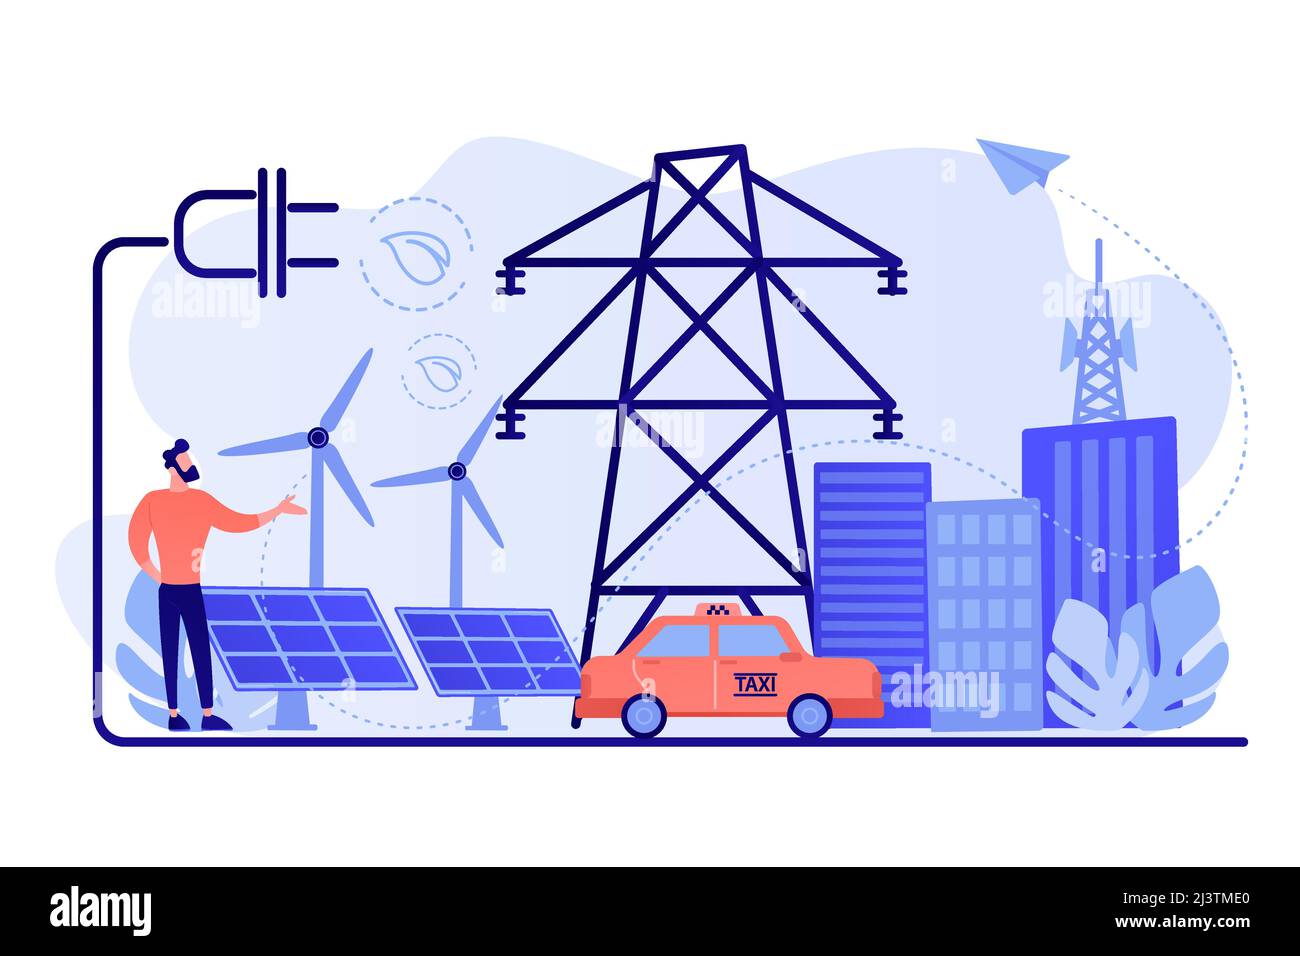 Businessman in green city and electric car using alternative fuel. Alternative fuels, chemically stored electricity, non-fossil sources concept. Pinki Stock Vector